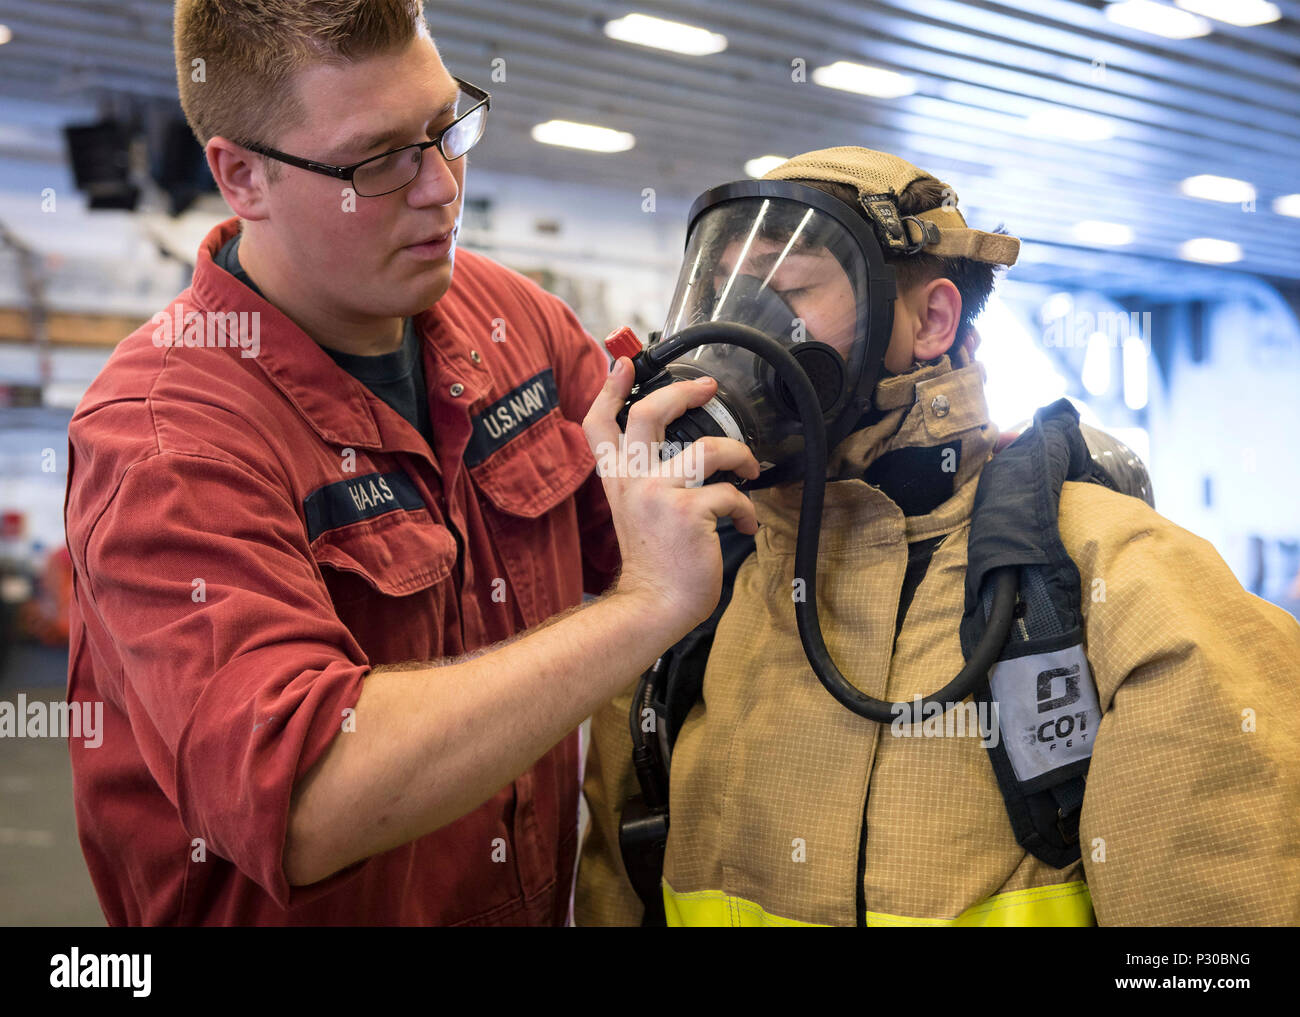 160811-N-WF272-024 EAST CHINA SEA (Aug. 11, 2016) Damage Controlman Fireman Cody Haas, from Appleton, Wis., helps Mass Communication Specialist 3rd Class Jeanette Mullinax, from Tampa, Fla., don firefighting equipment during Mobility – Damage Control (MOB-D) training aboard amphibious assault ship USS Bonhomme Richard (LHD 6). Bonhomme Richard, flagship of the Bonhomme Richard Expeditionary Strike Group, is operating in the U.S. 7th Fleet area of operations in support of security and stability in the Indo-Asia-Pacific region. (U.S. Navy photo by Mass Communication Specialist 2nd Class Diana Qu Stock Photo